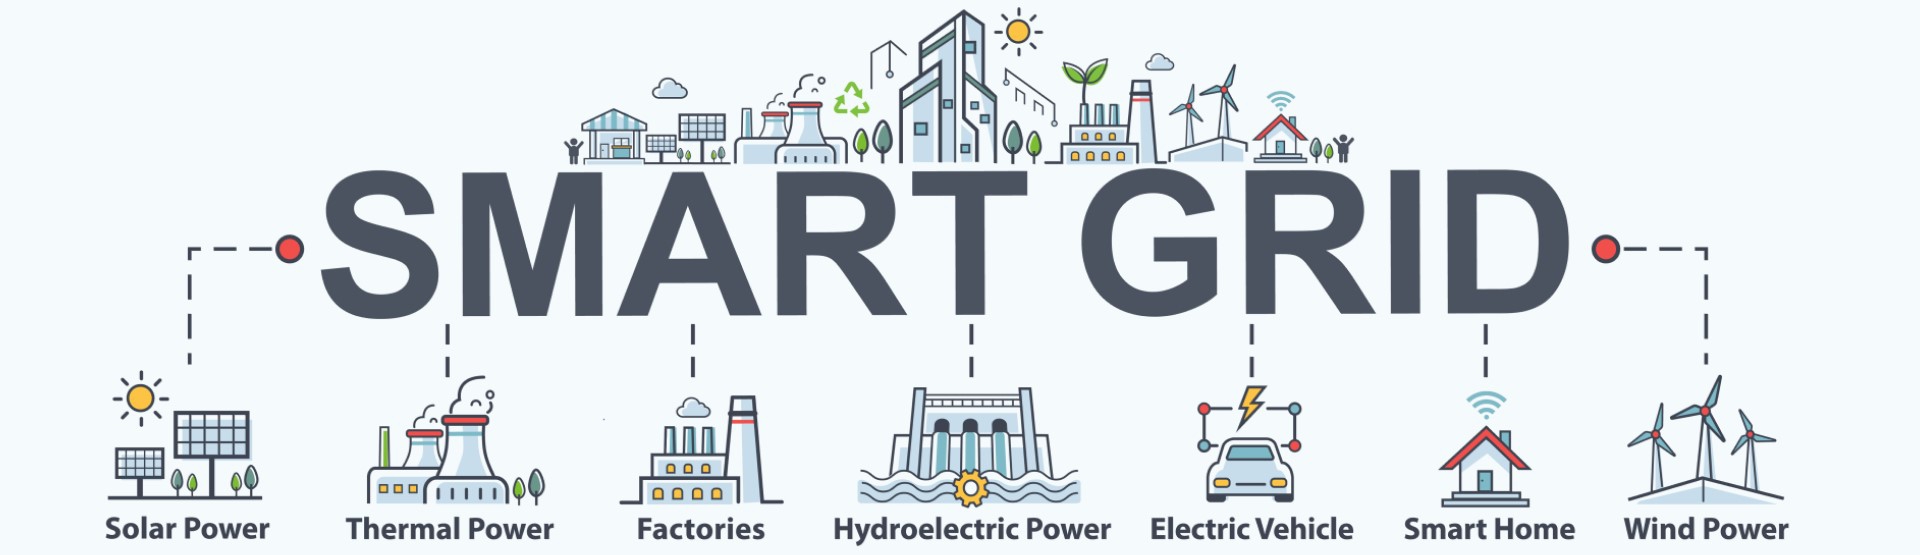 Smart Grid Solar Power, Thermal Power, Factories, Hydroelectric Power, Electric Vehicle, Smart Home, and Wind Power